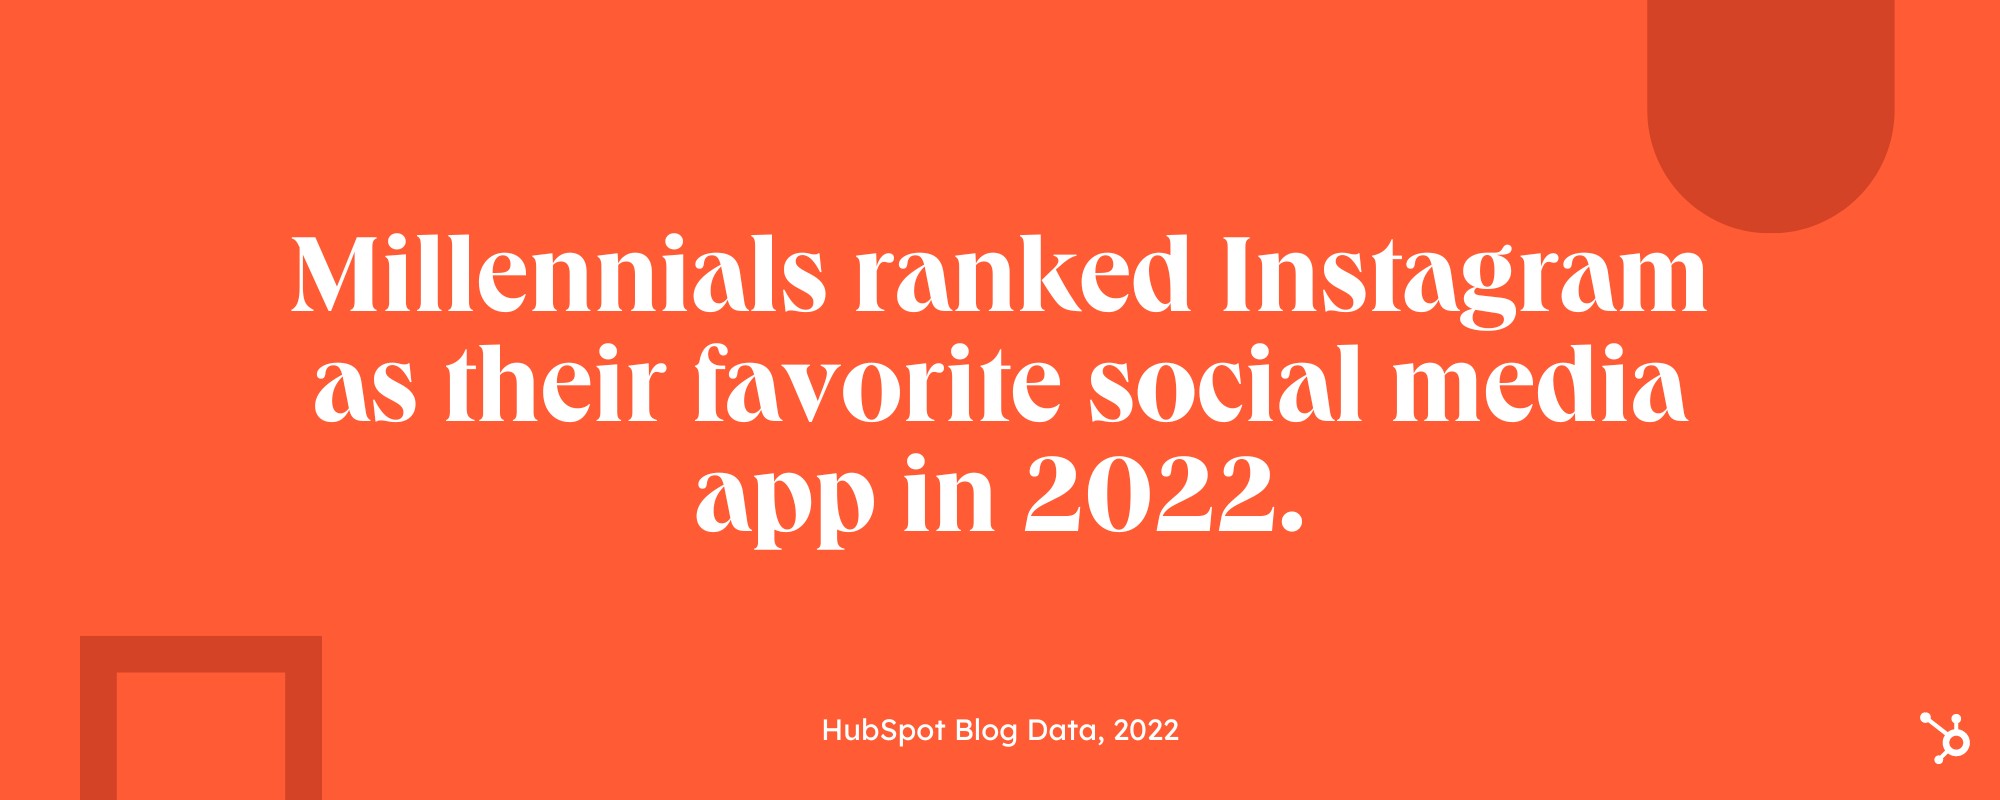 Is Instagram Dying: A stat showing that  Millennialls ranked Instagram as their favorite social media app in 2022.